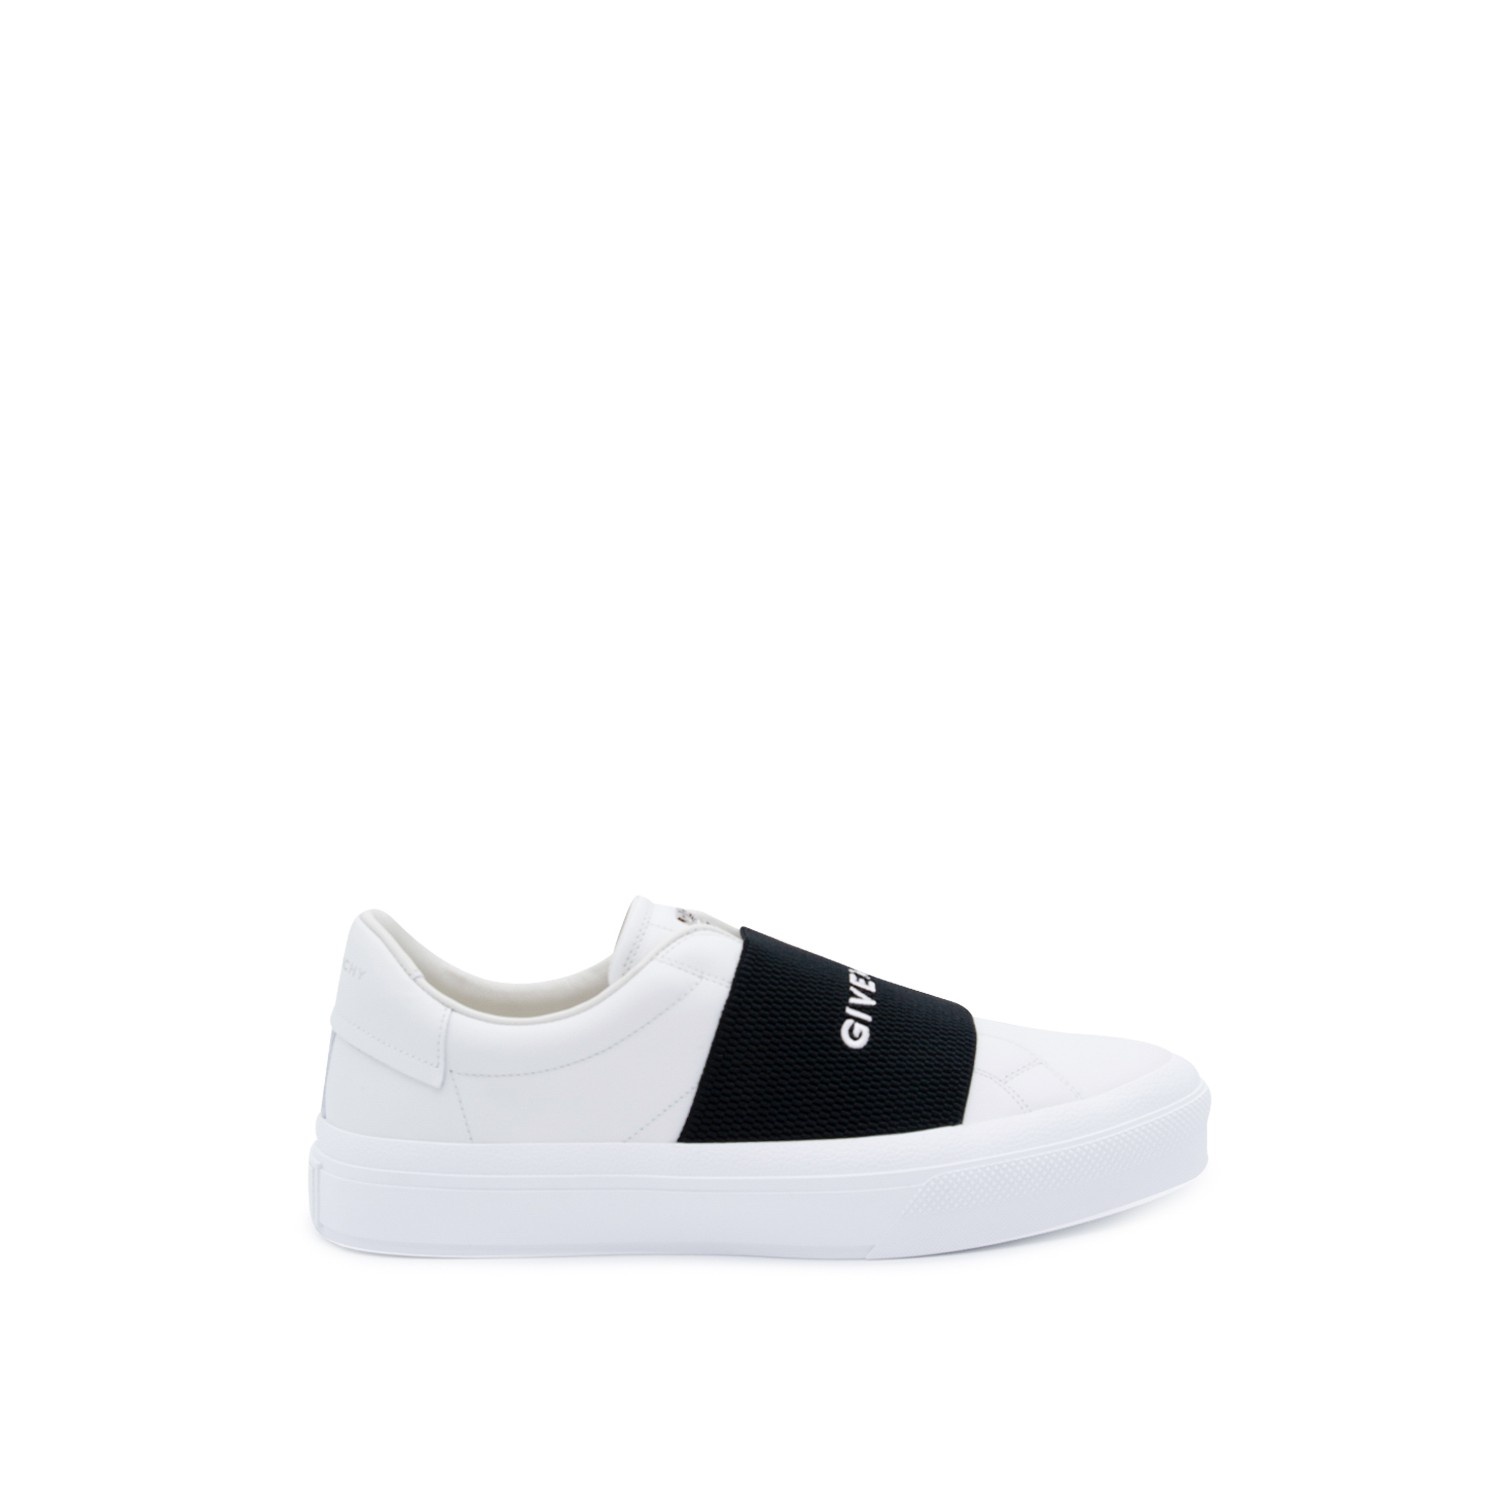 WHITE AND BLACK LEATHER CITY SPORT LOW TOP SNEAKERS - 1